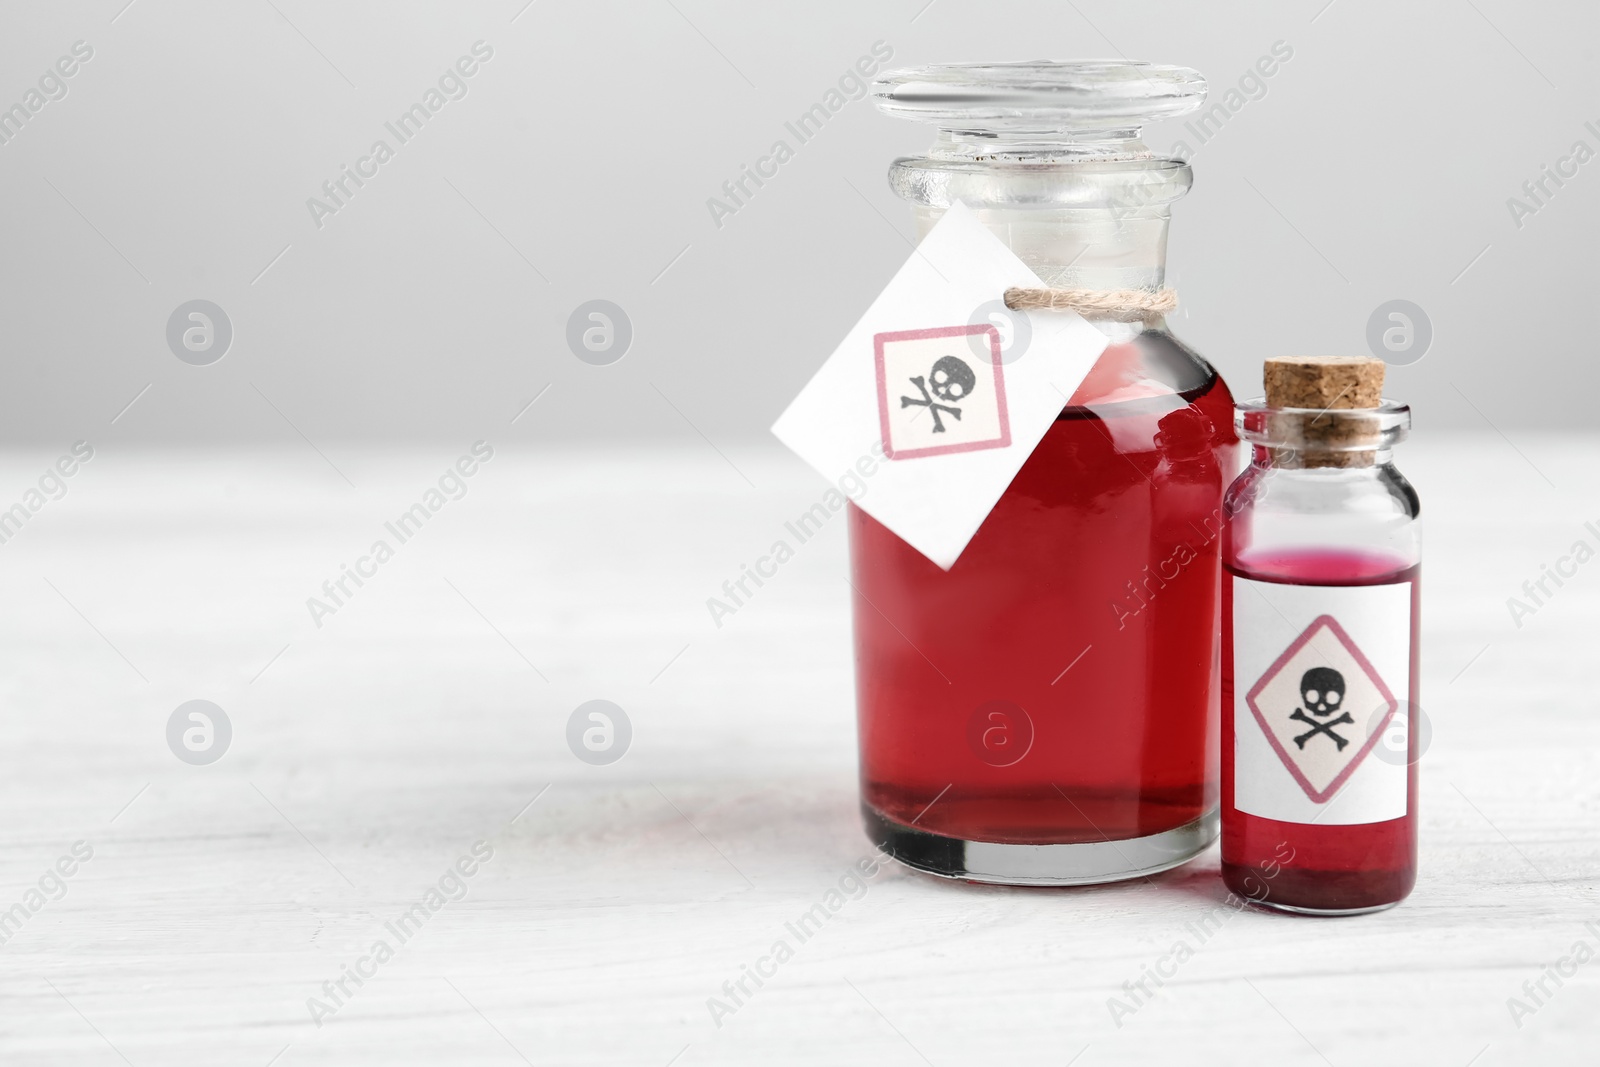 Photo of Glass bottle and vial of poison with warning signs on white wooden table. Space for text